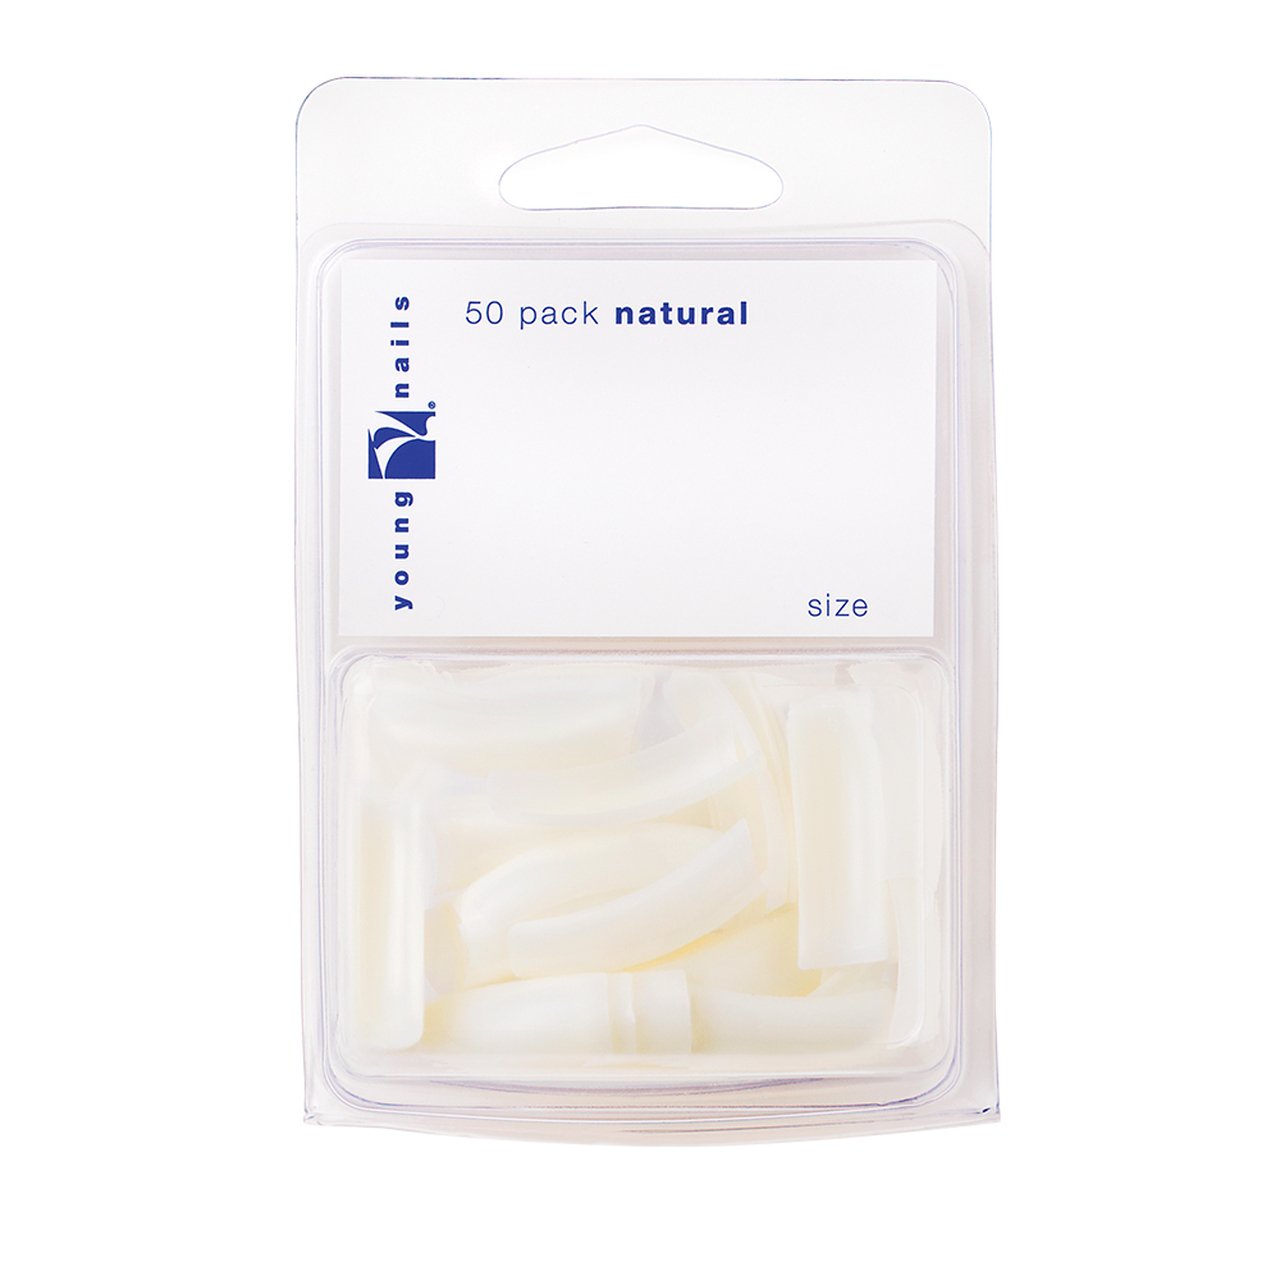 Natural Tips 50 Pack Refill #2